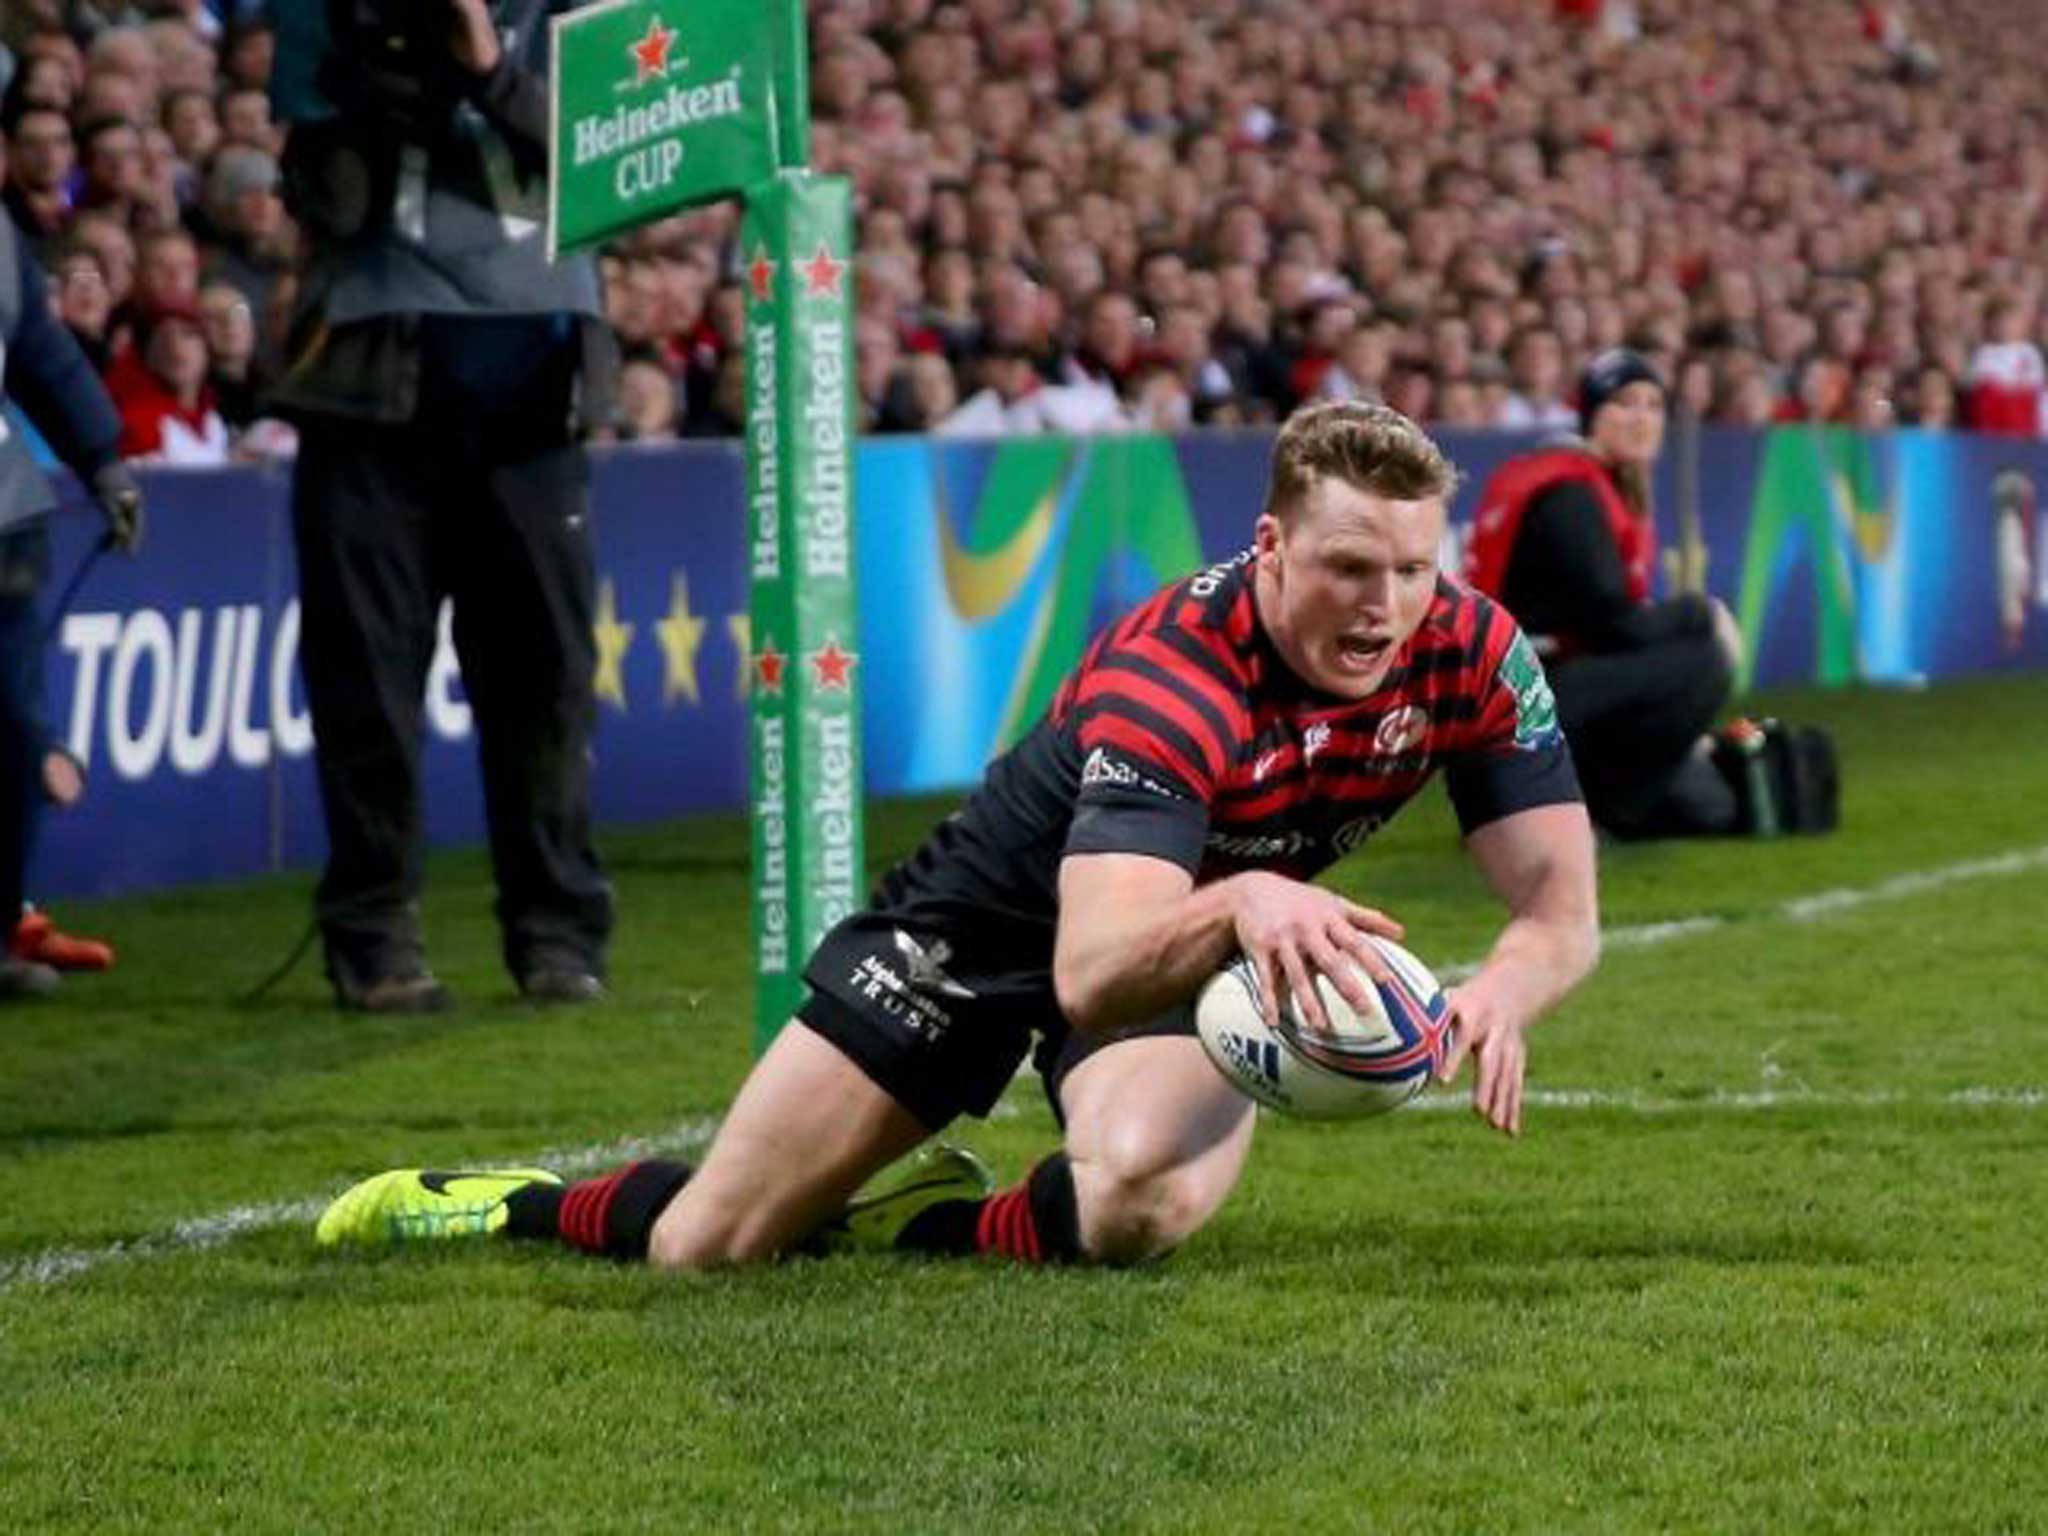 Double trouble: Saracens’ Chris Ashton plunges over to score one of his two decisive tries